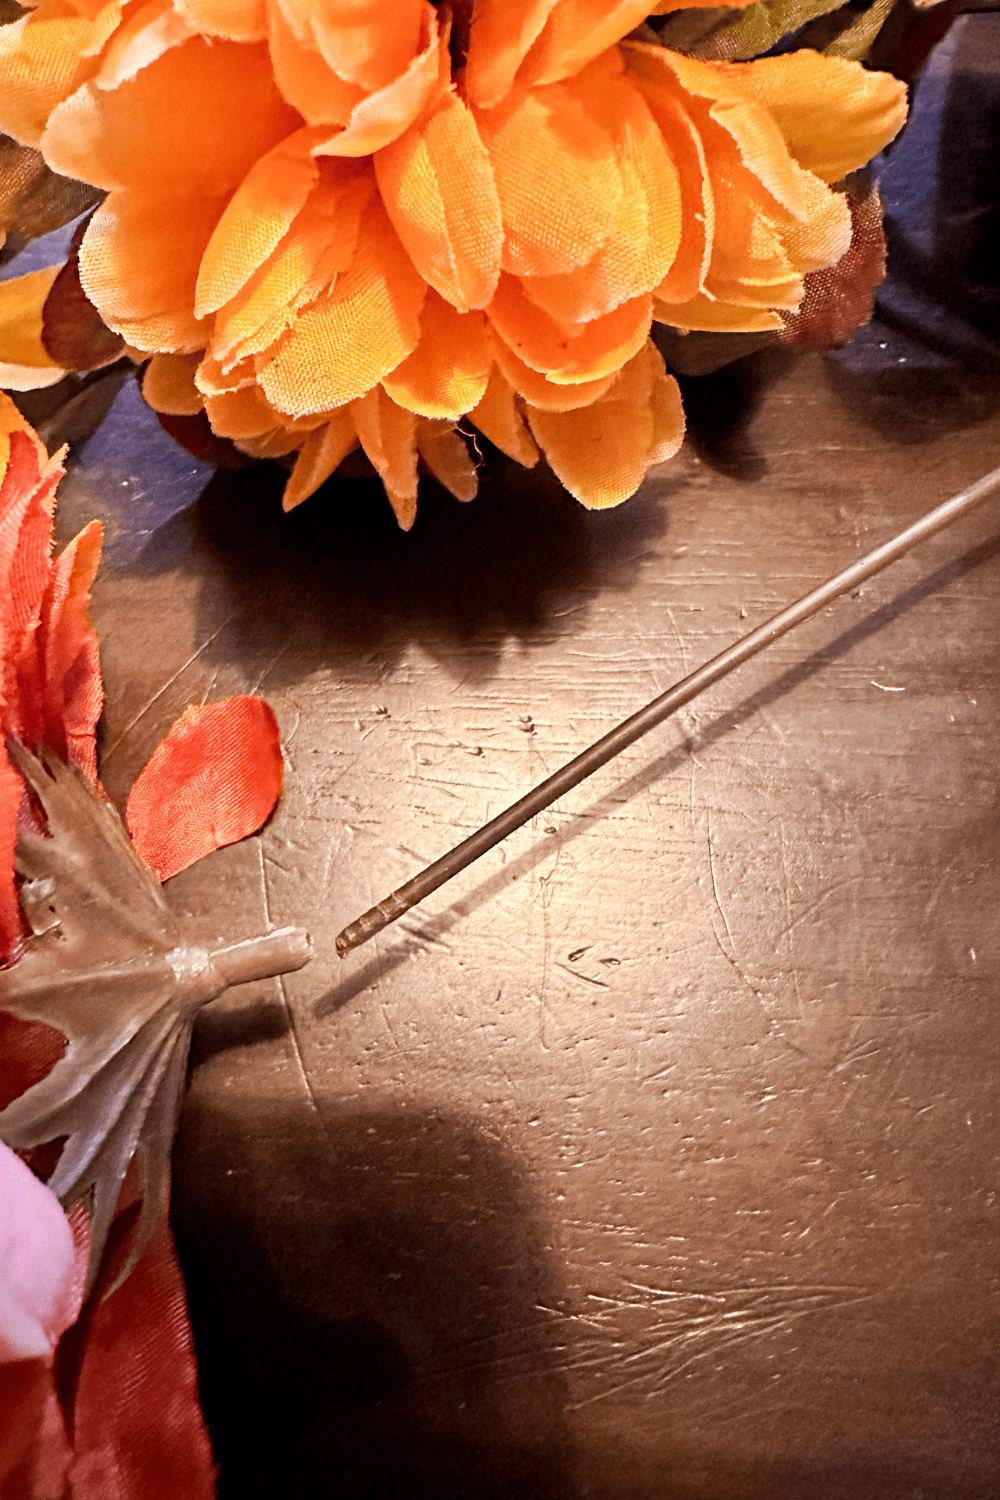 Showing a close up of popping a fake flower top off of a stem